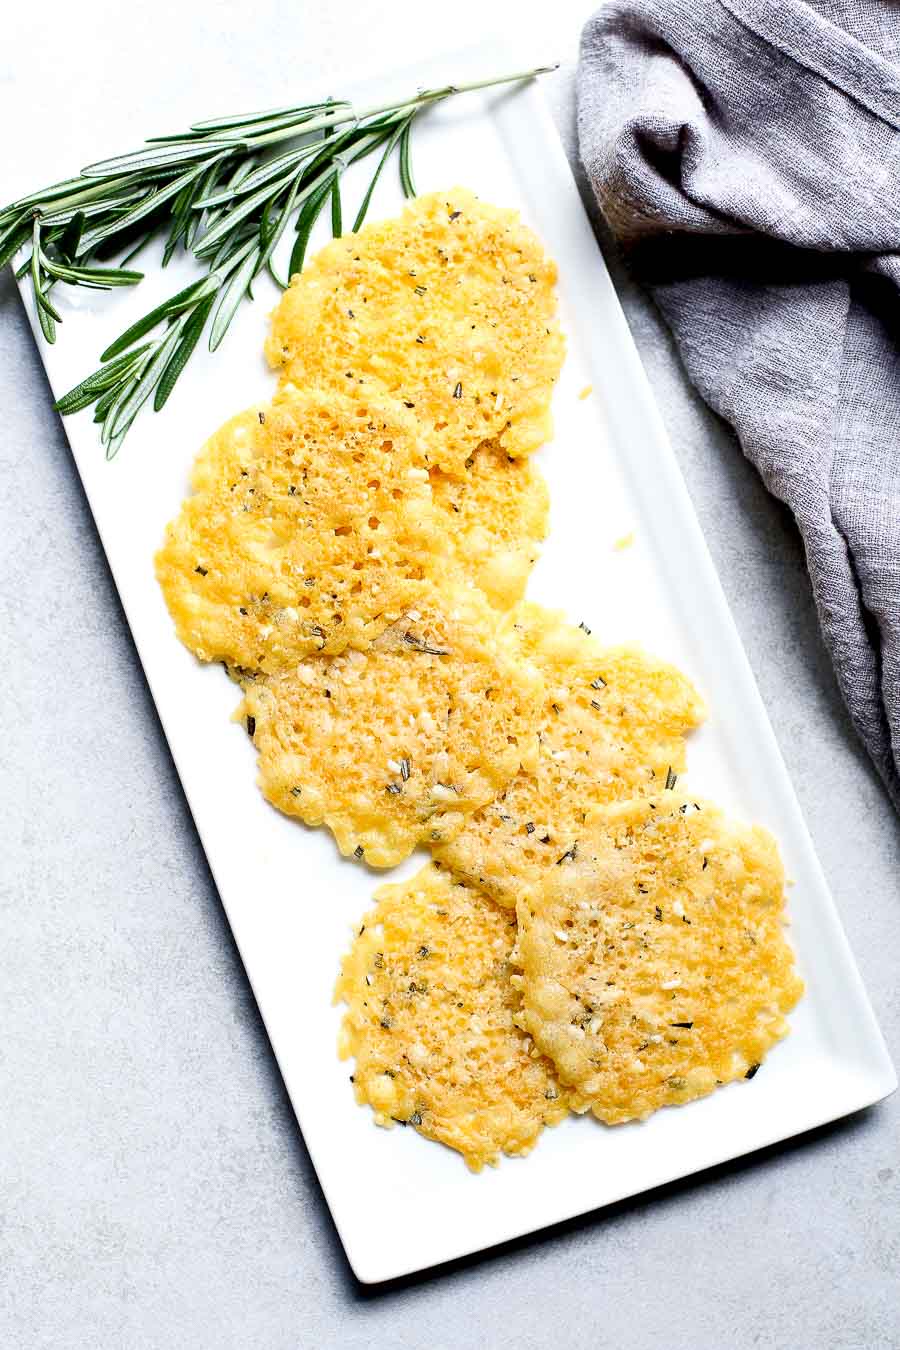 Rosemary Parmesan Cheese Crisps on a white plate with a sprig of rosemary